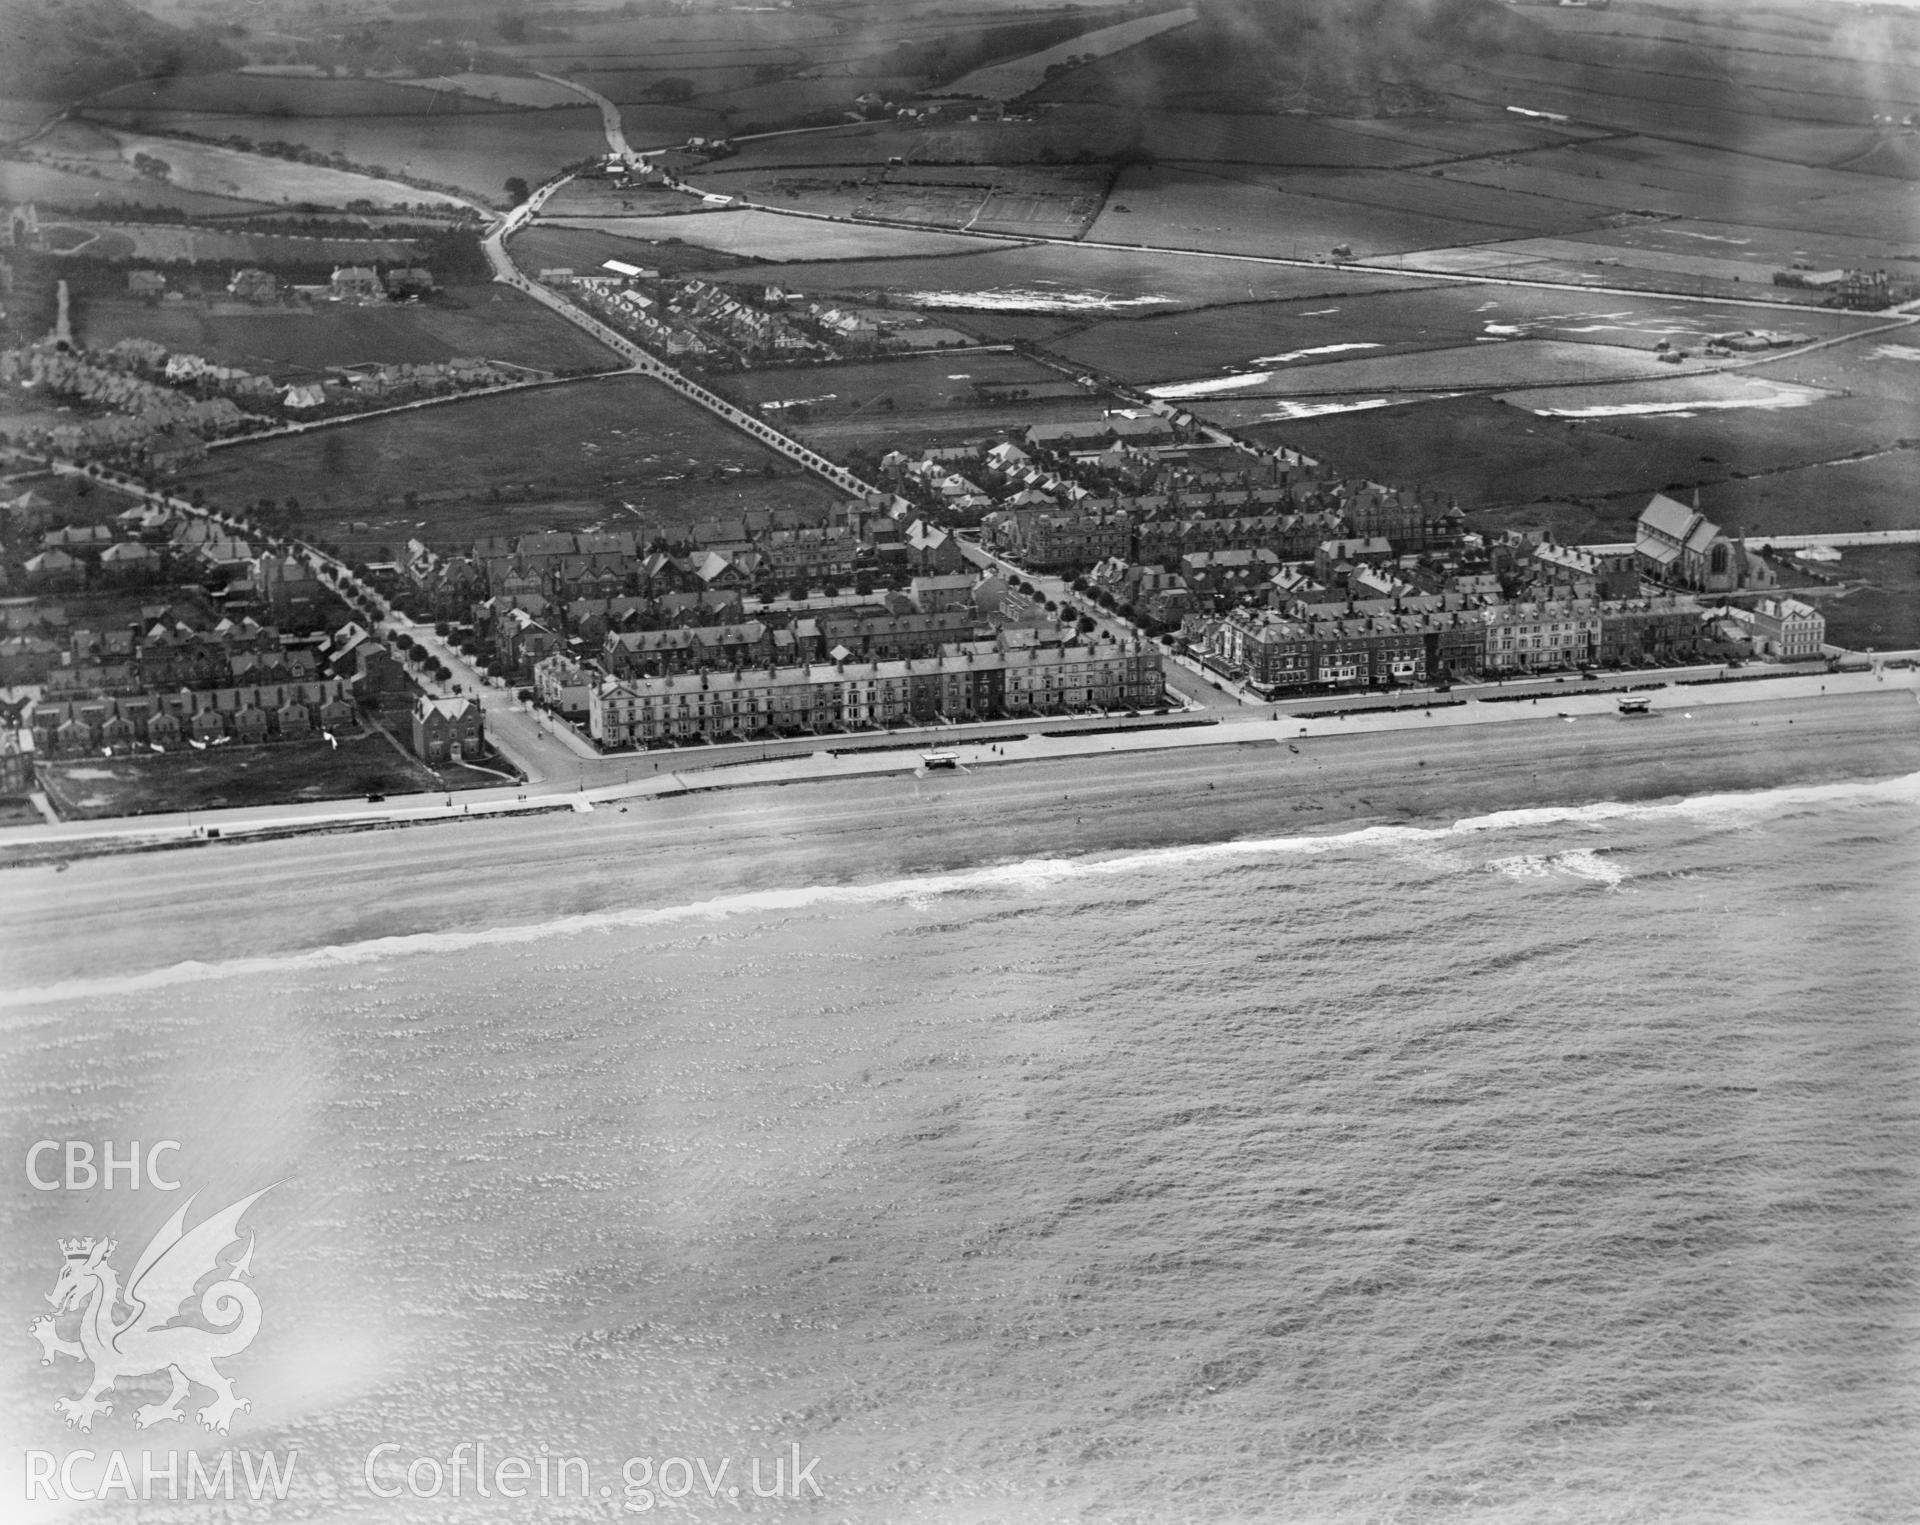 View of Llandudno showing eastern part of town, oblique aerial view. 5?x4? black and white glass plate negative.